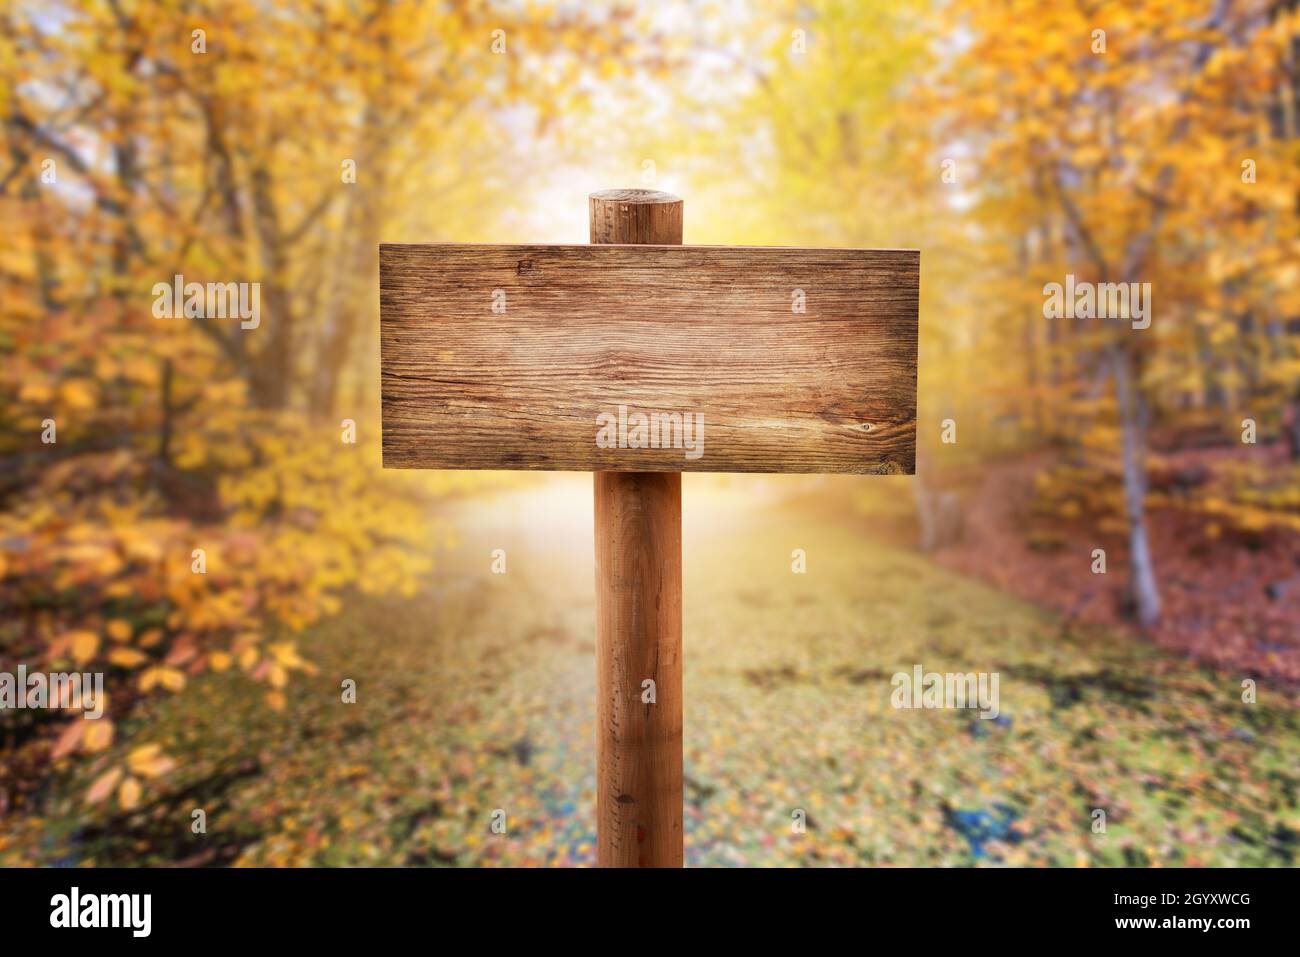 Natural wooden Mock up sign board or direction boardin the forest with autumn background. High quality photo Stock Photo